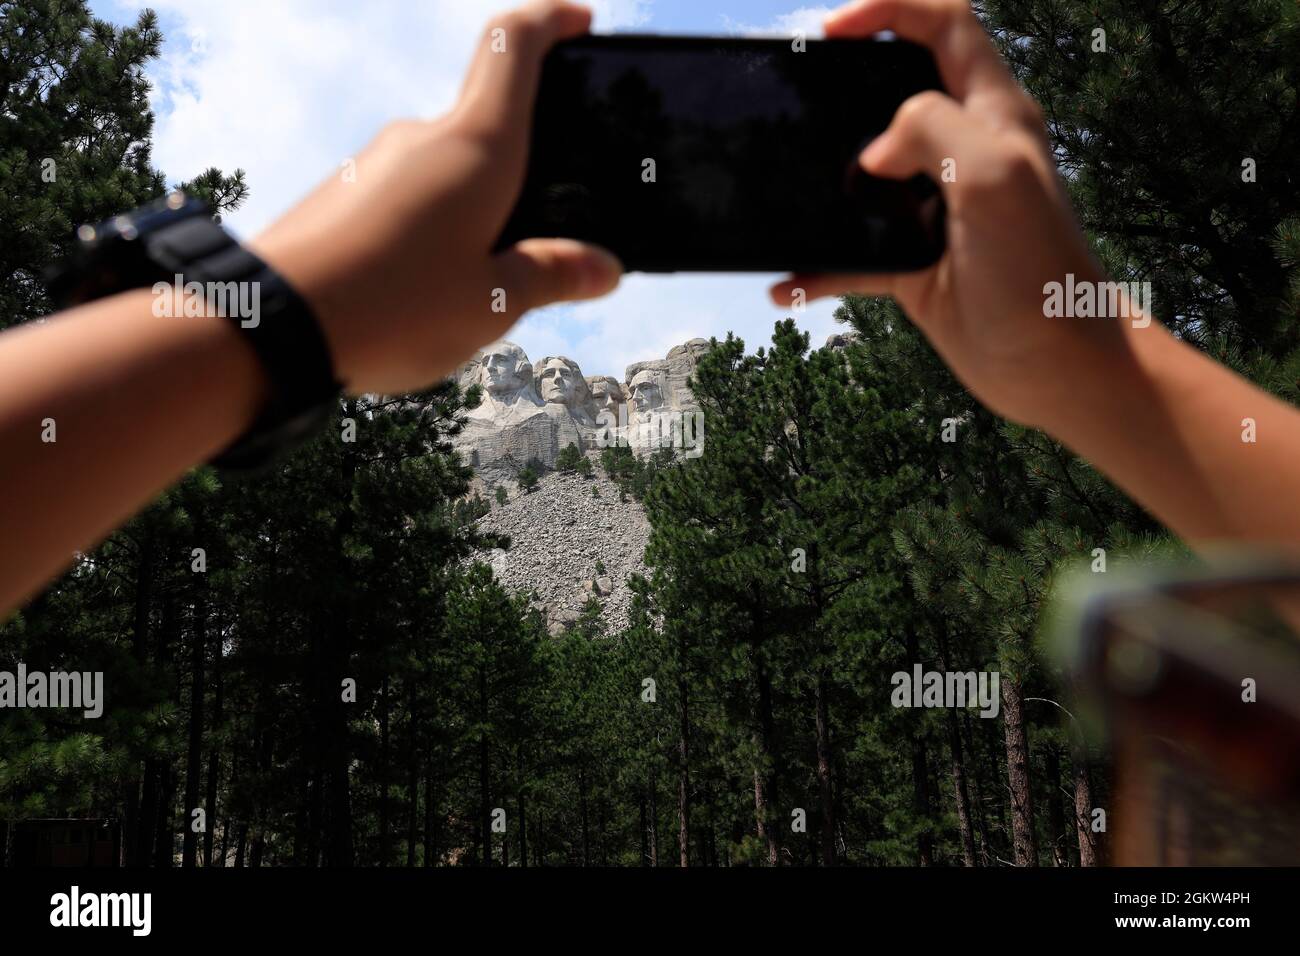 Hands holding phone taking picture of the sculpture of Mount Rushmore National Memorial. Keystone,South Dakota,USA Stock Photo